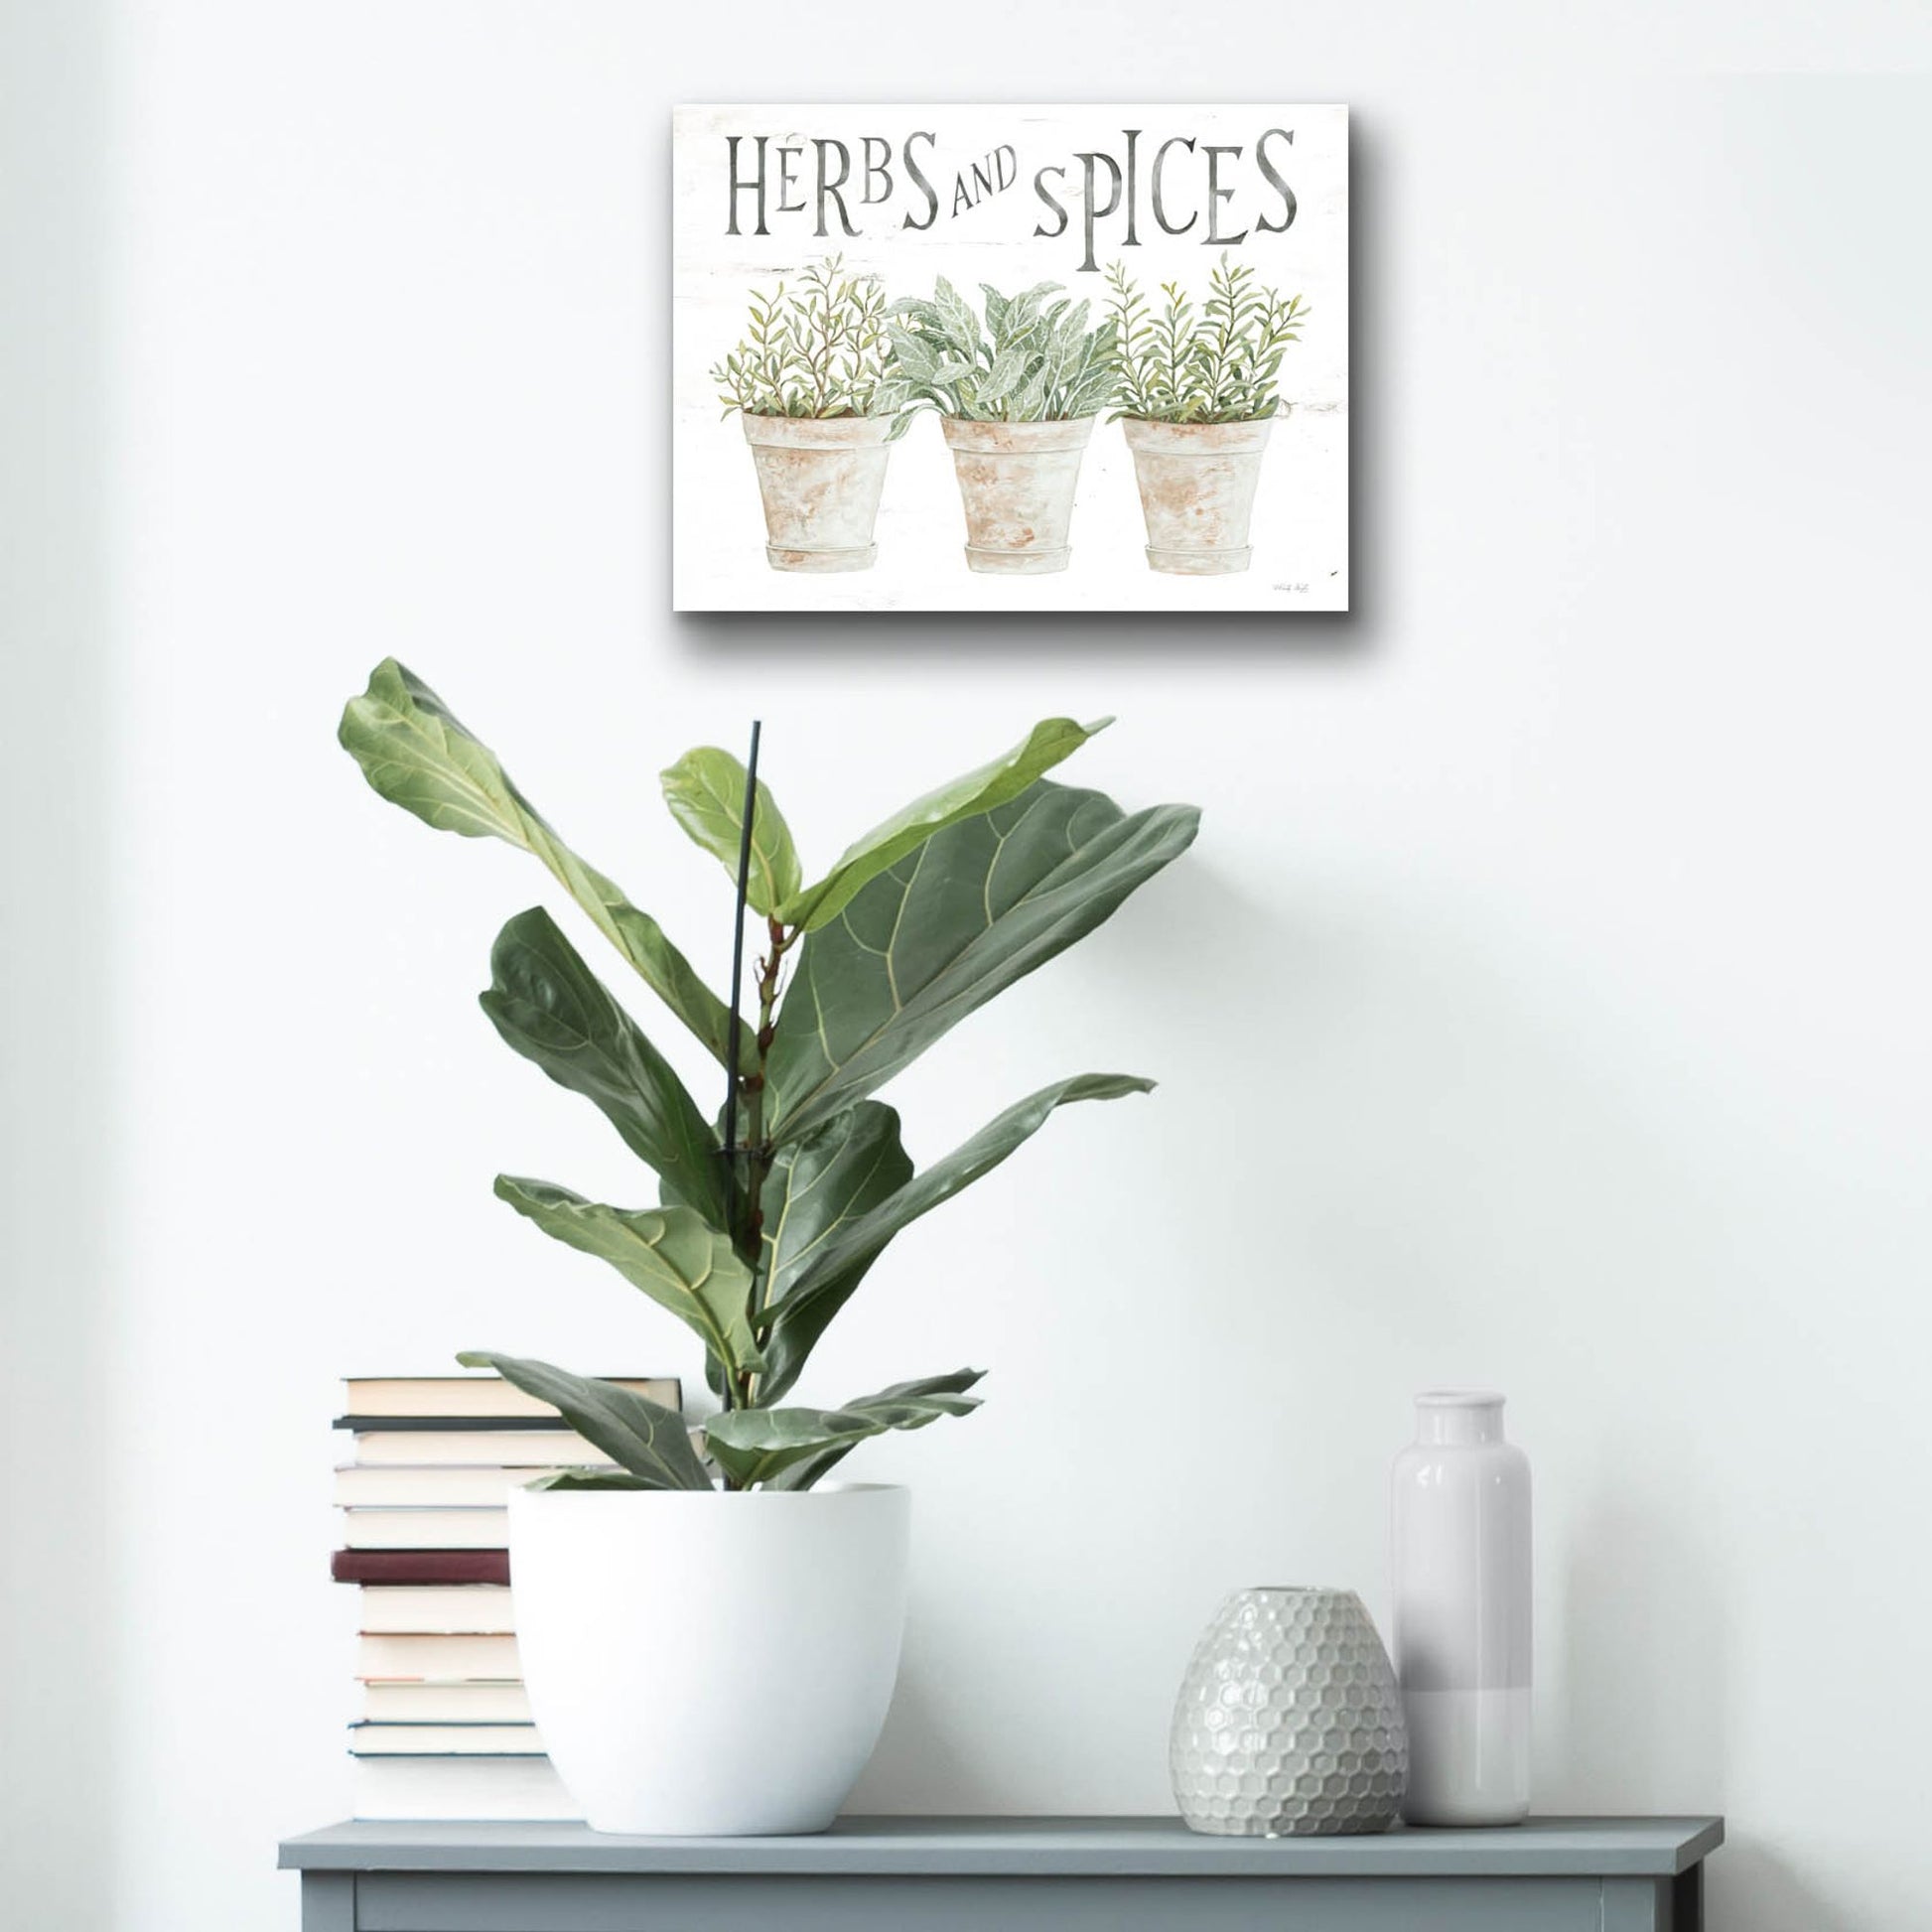 Epic Art 'Herbs and Spices' by Cindy Jacobs, Acrylic Glass Wall Art,16x12